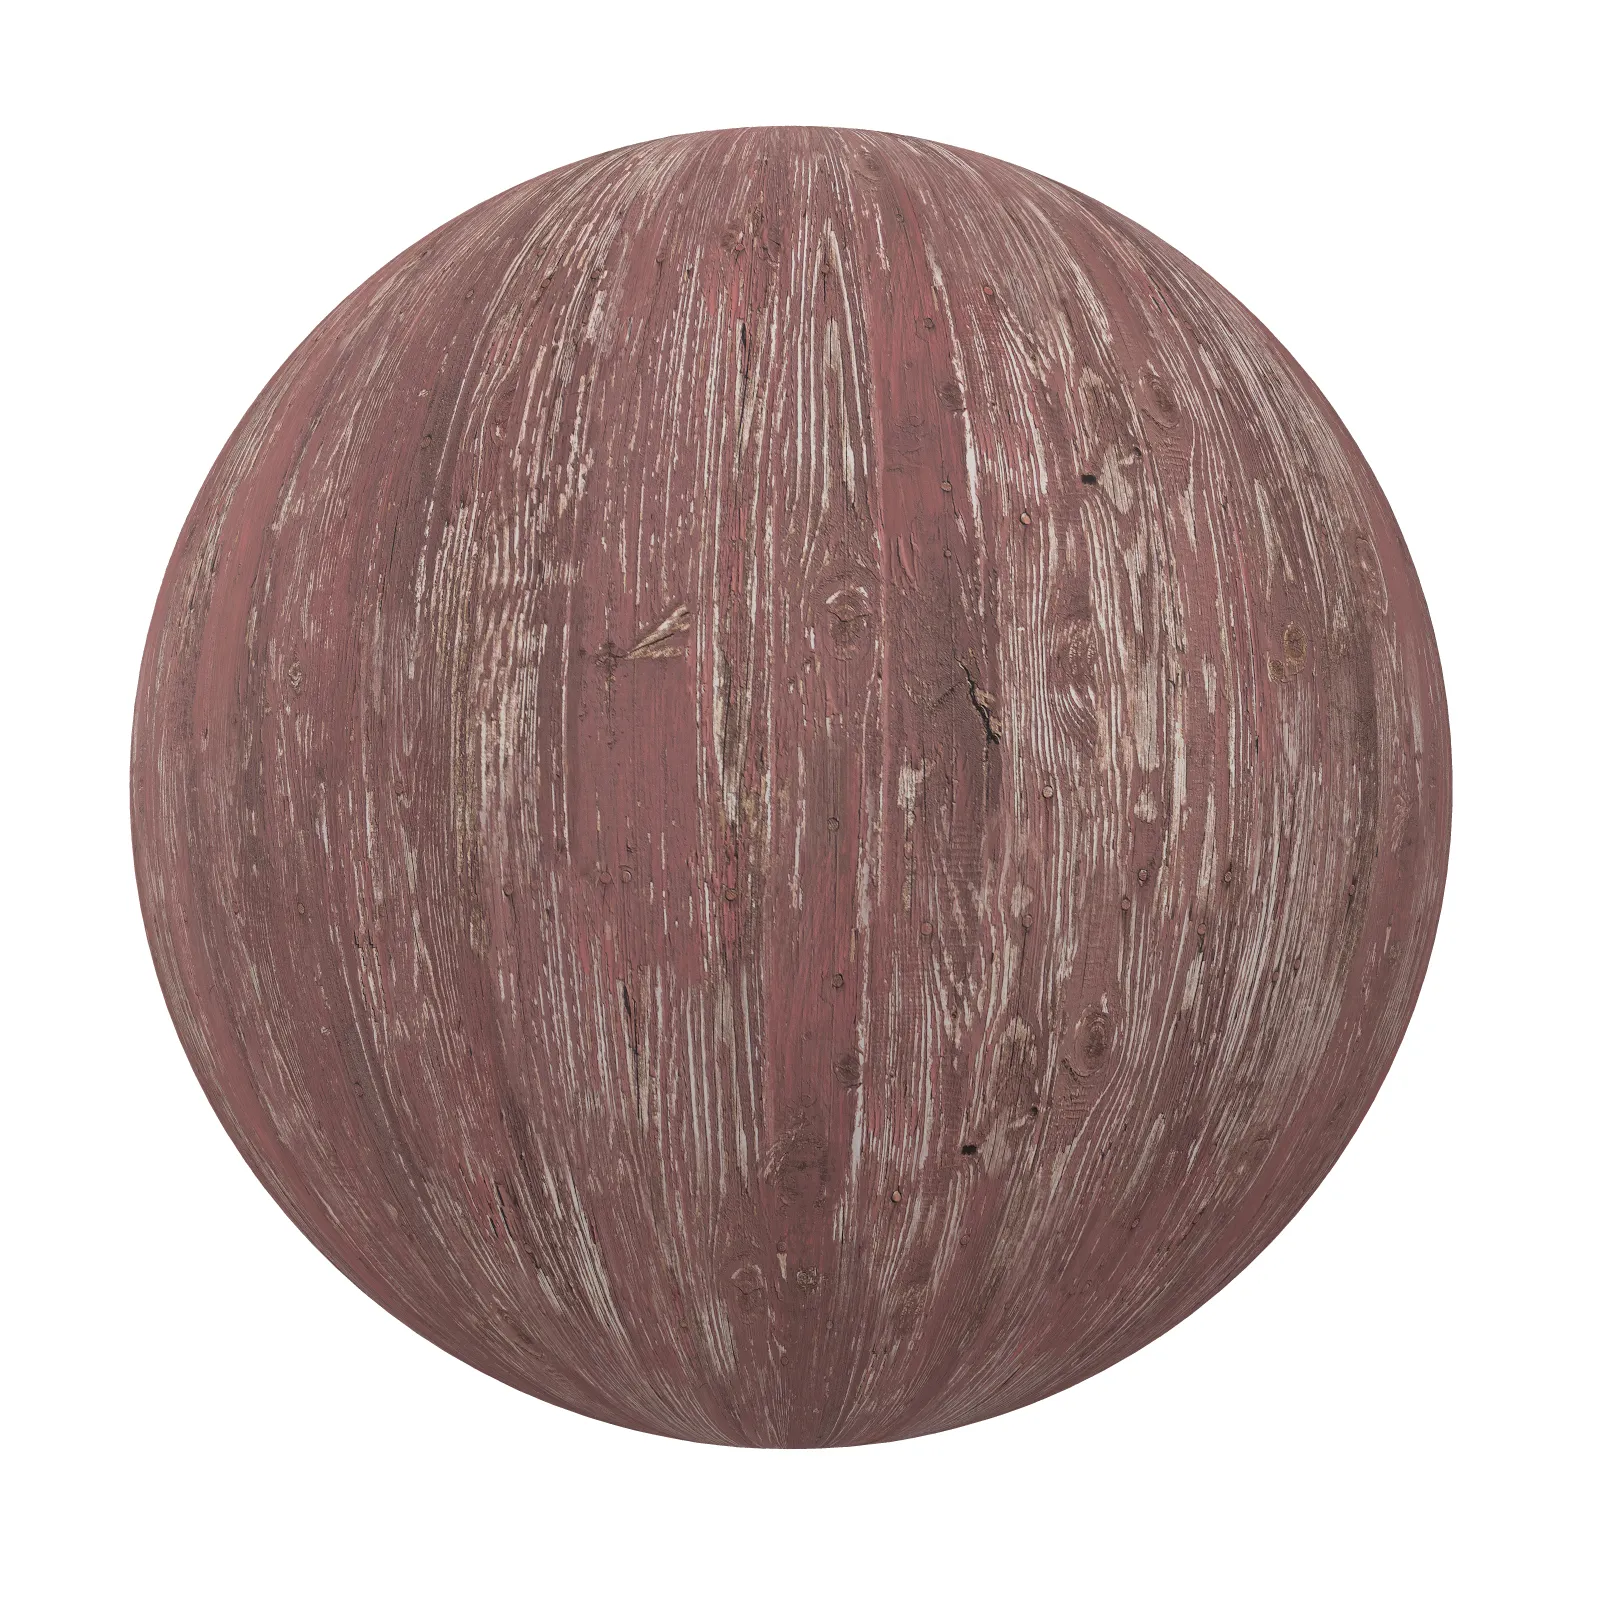 TEXTURES – WOOD – Red Painted Old Wood